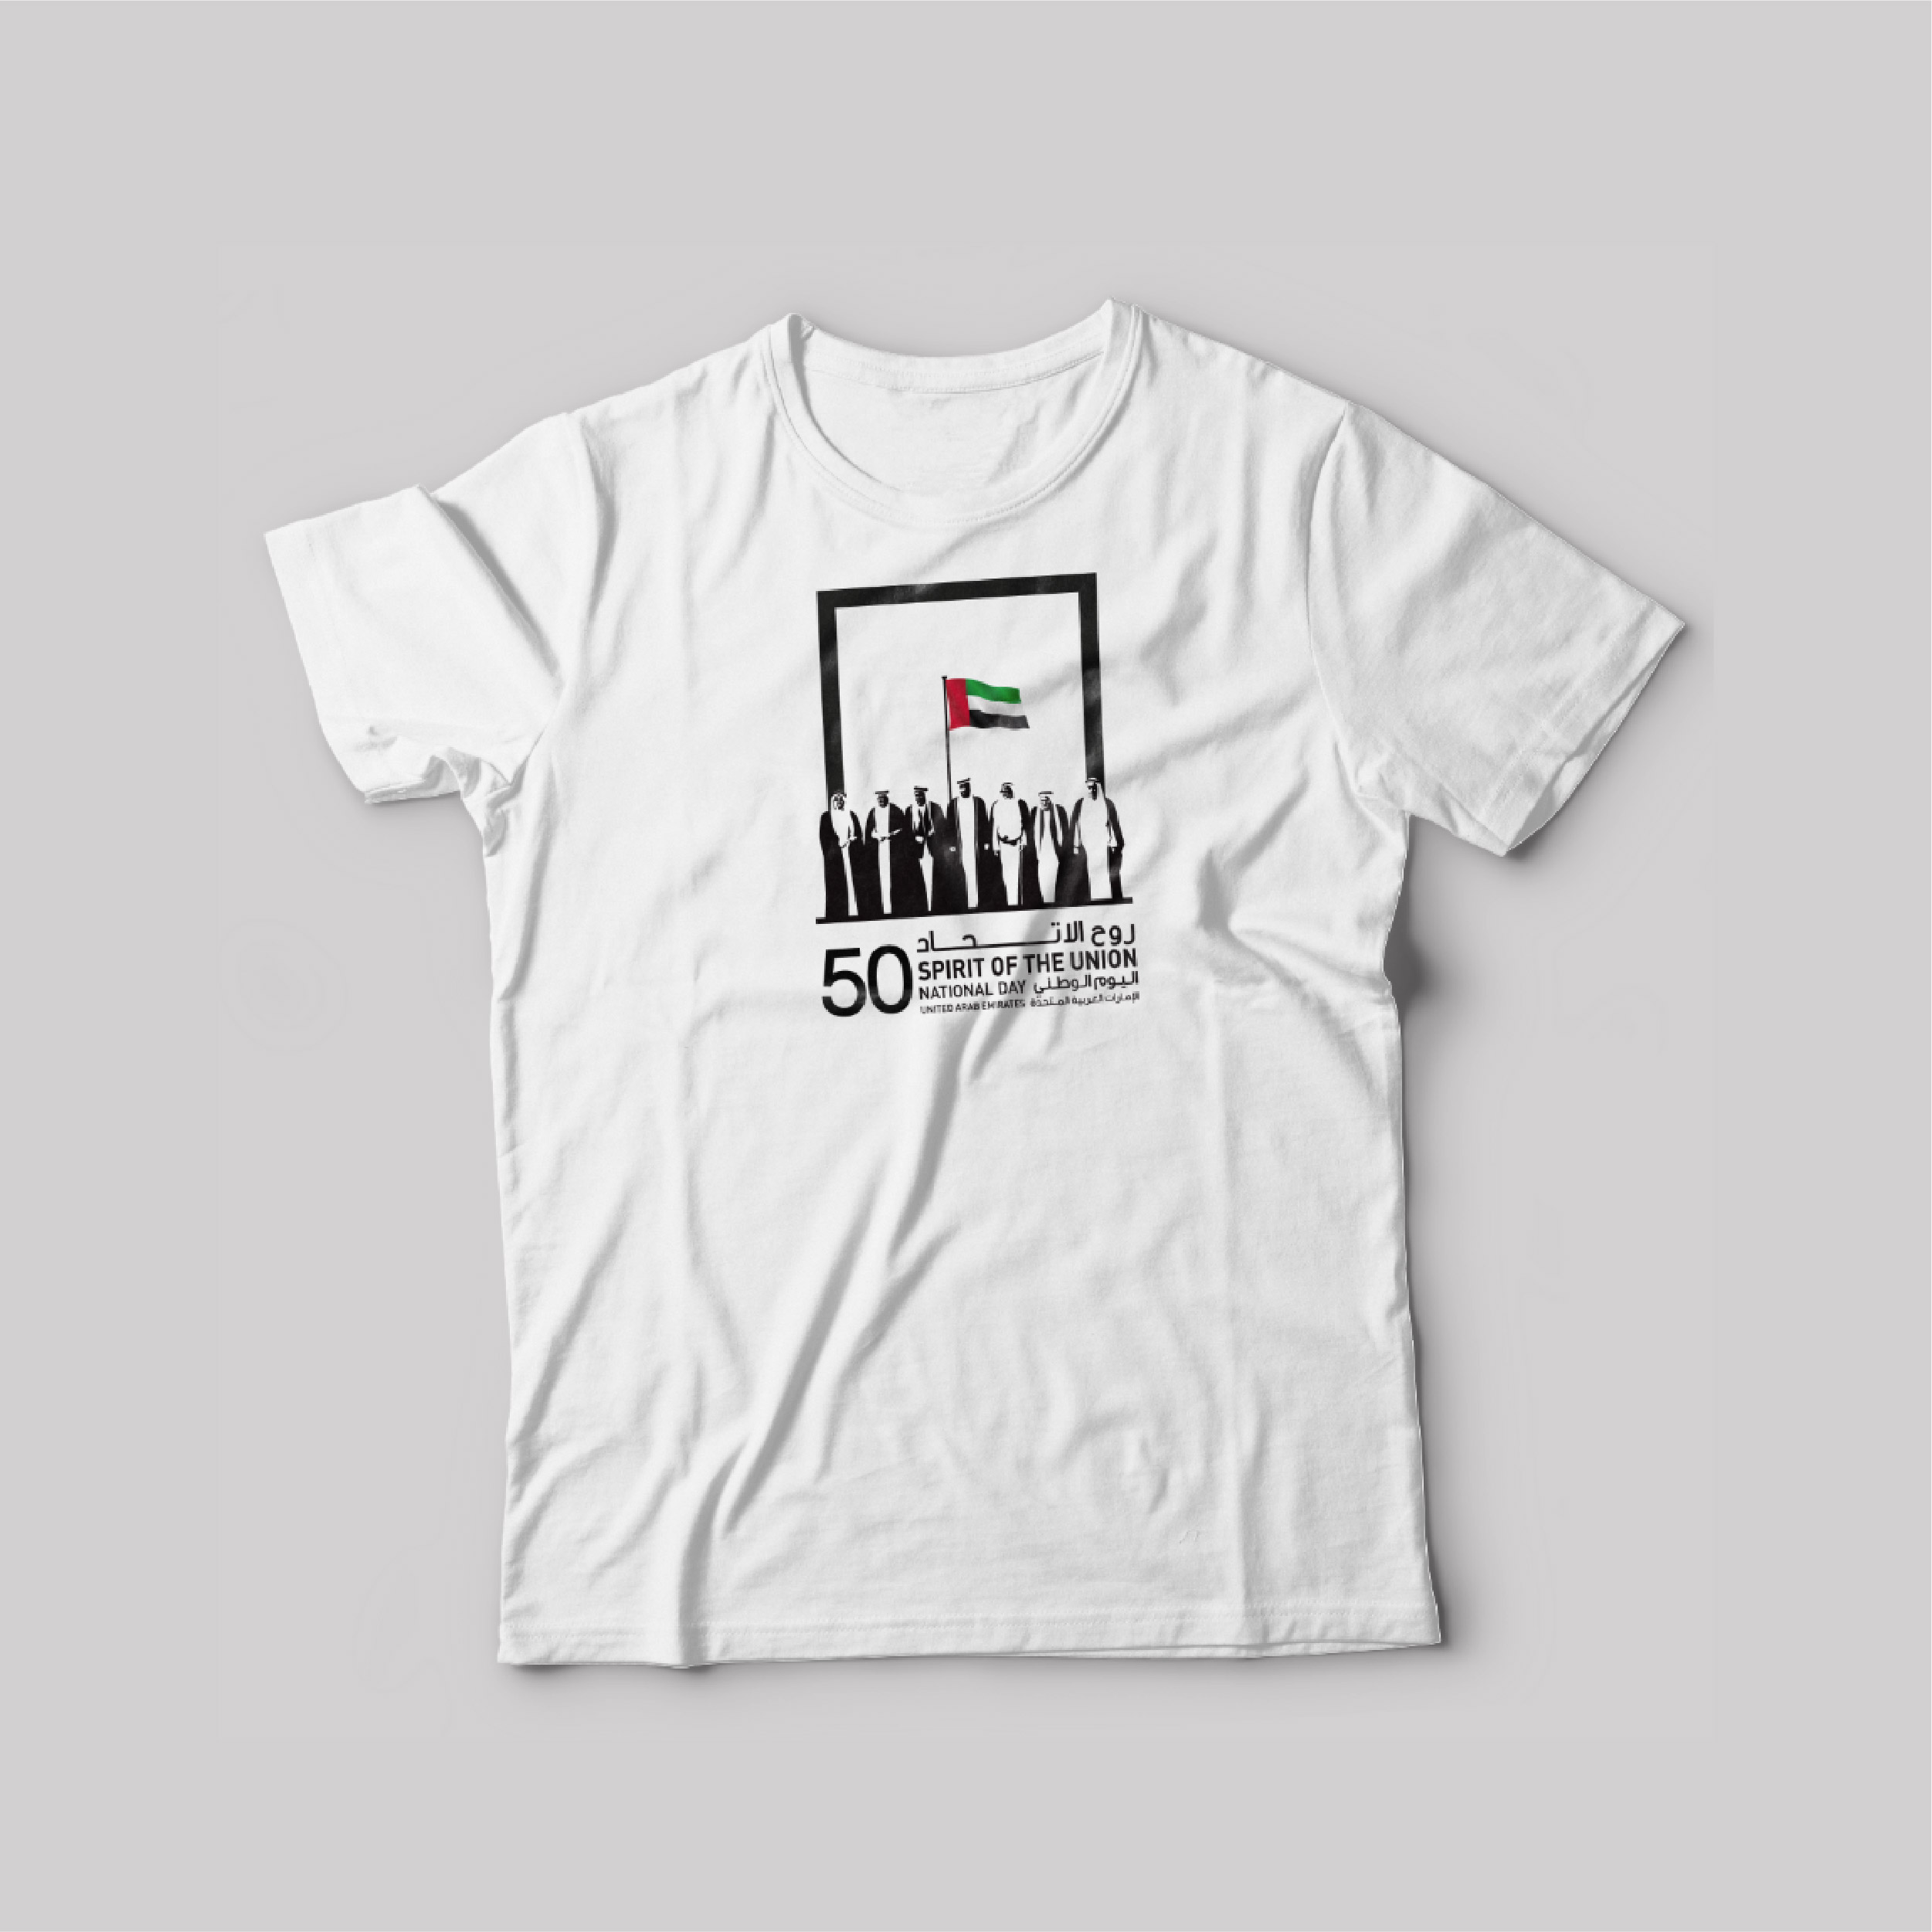 UAE National day T-Shirt White Round Neck For Unisex Sprit of Union with Kings 